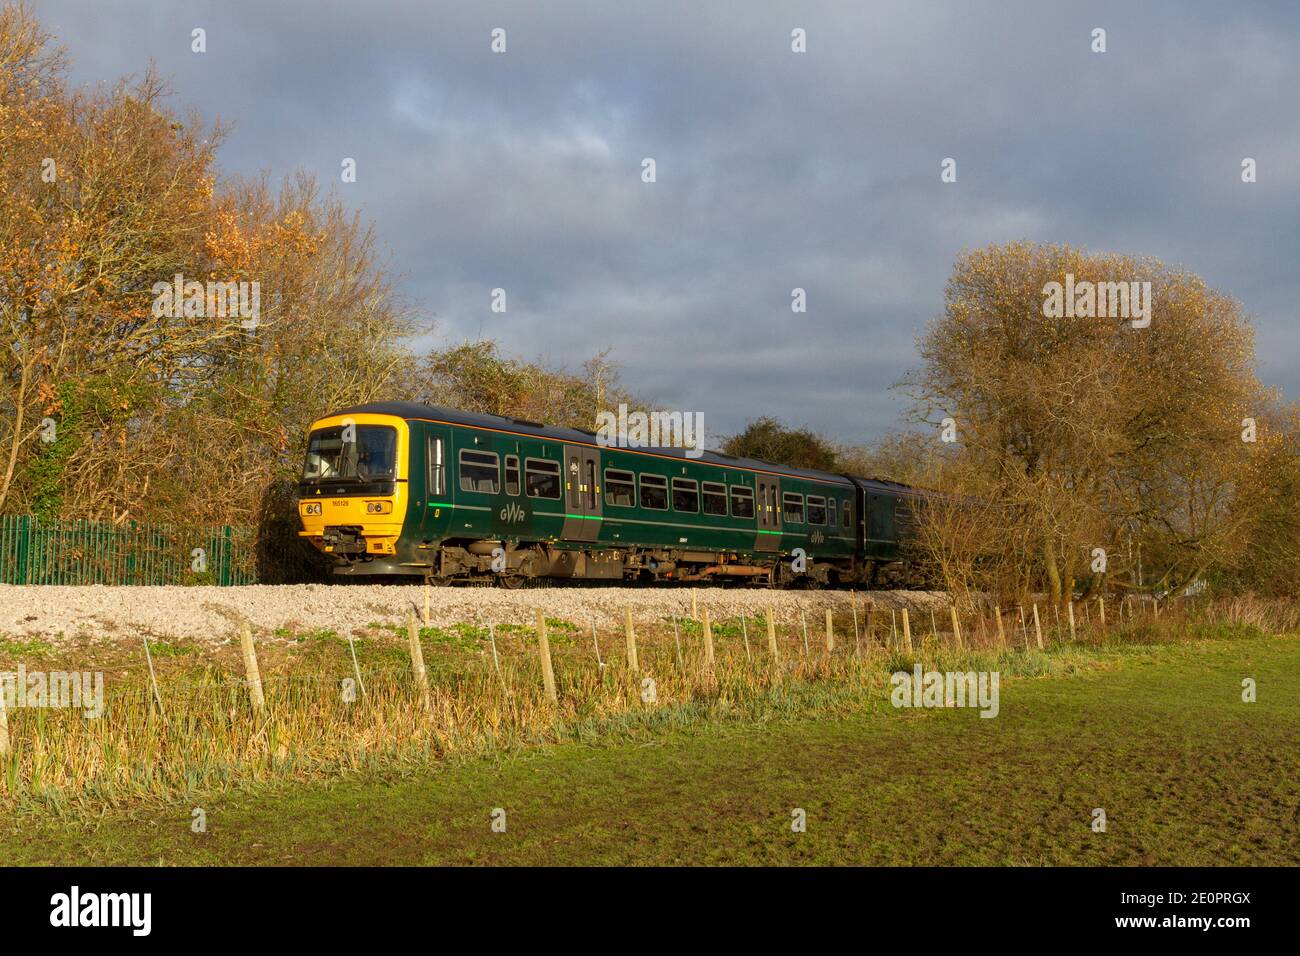 A GWR class 165 train on the Marlow branch line ('The Marlow Donkey') beside the River Thames, Bourne End, UK. Stock Photo